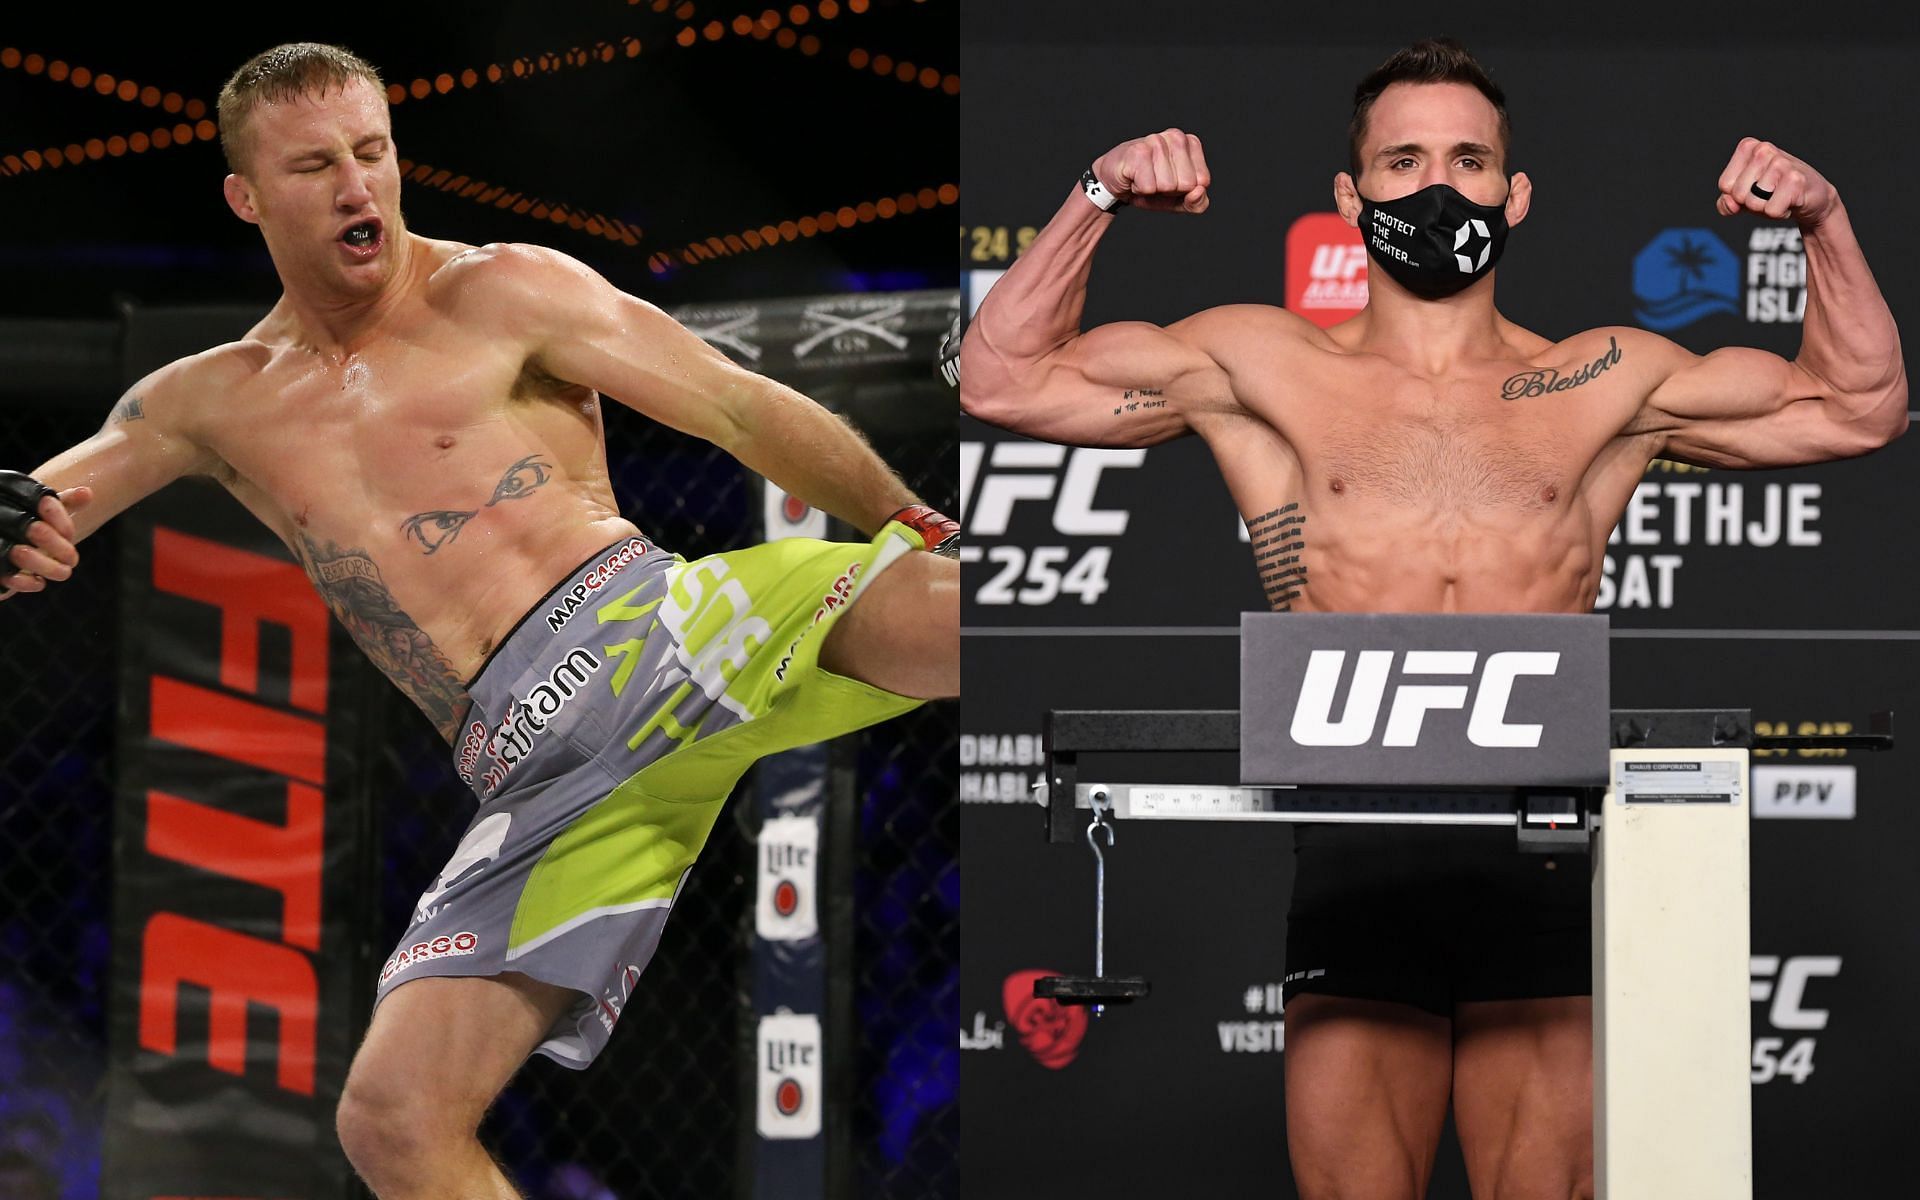 UFC lightweight contenders Justin Gaethje (left) and Michael Chandler (right)